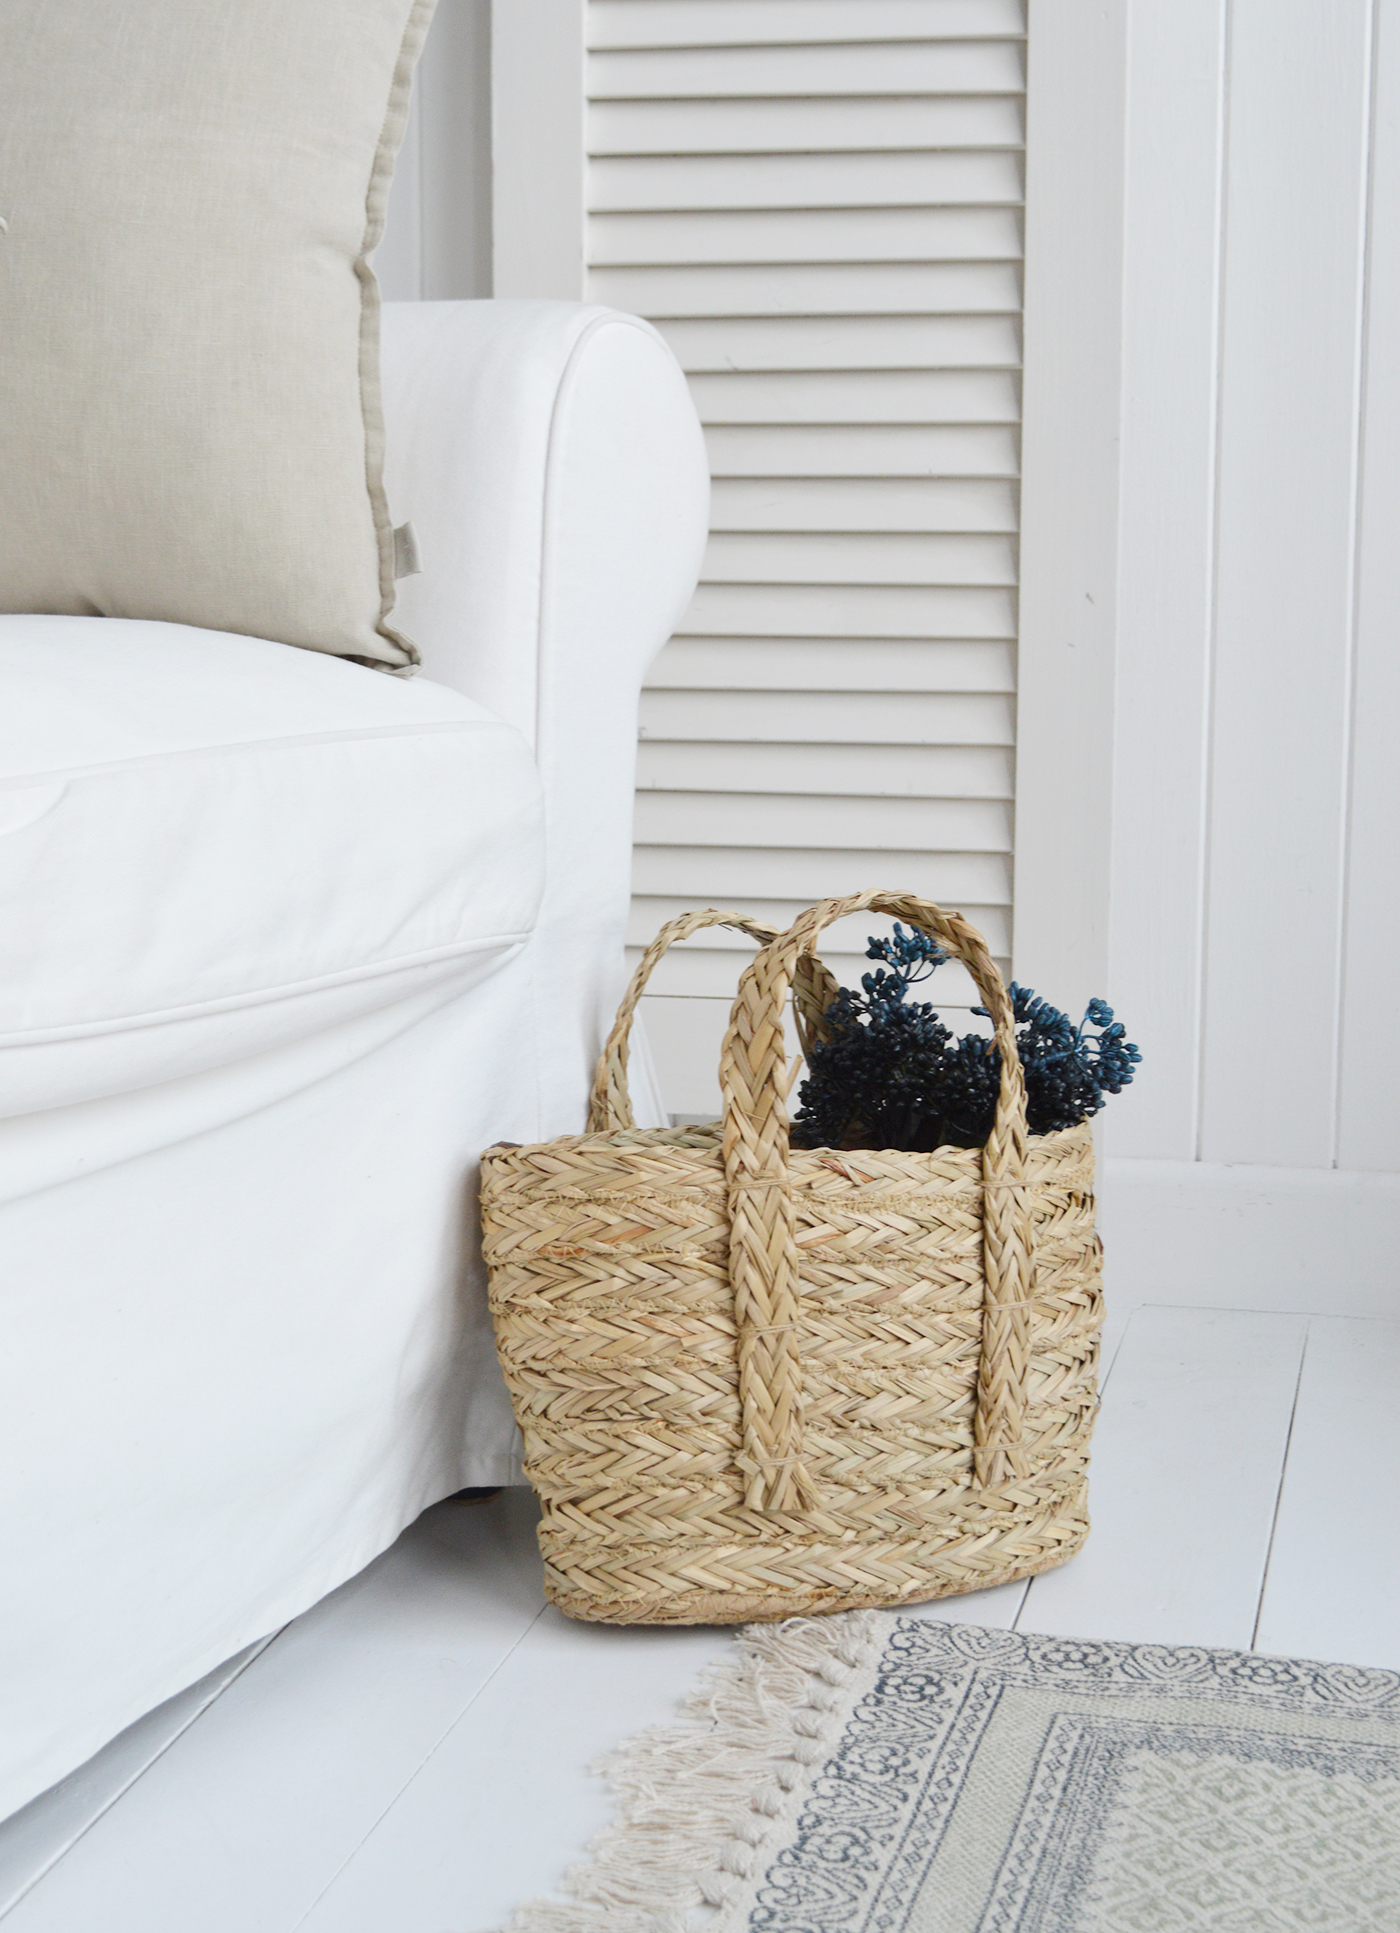 Baskets for New England furniture